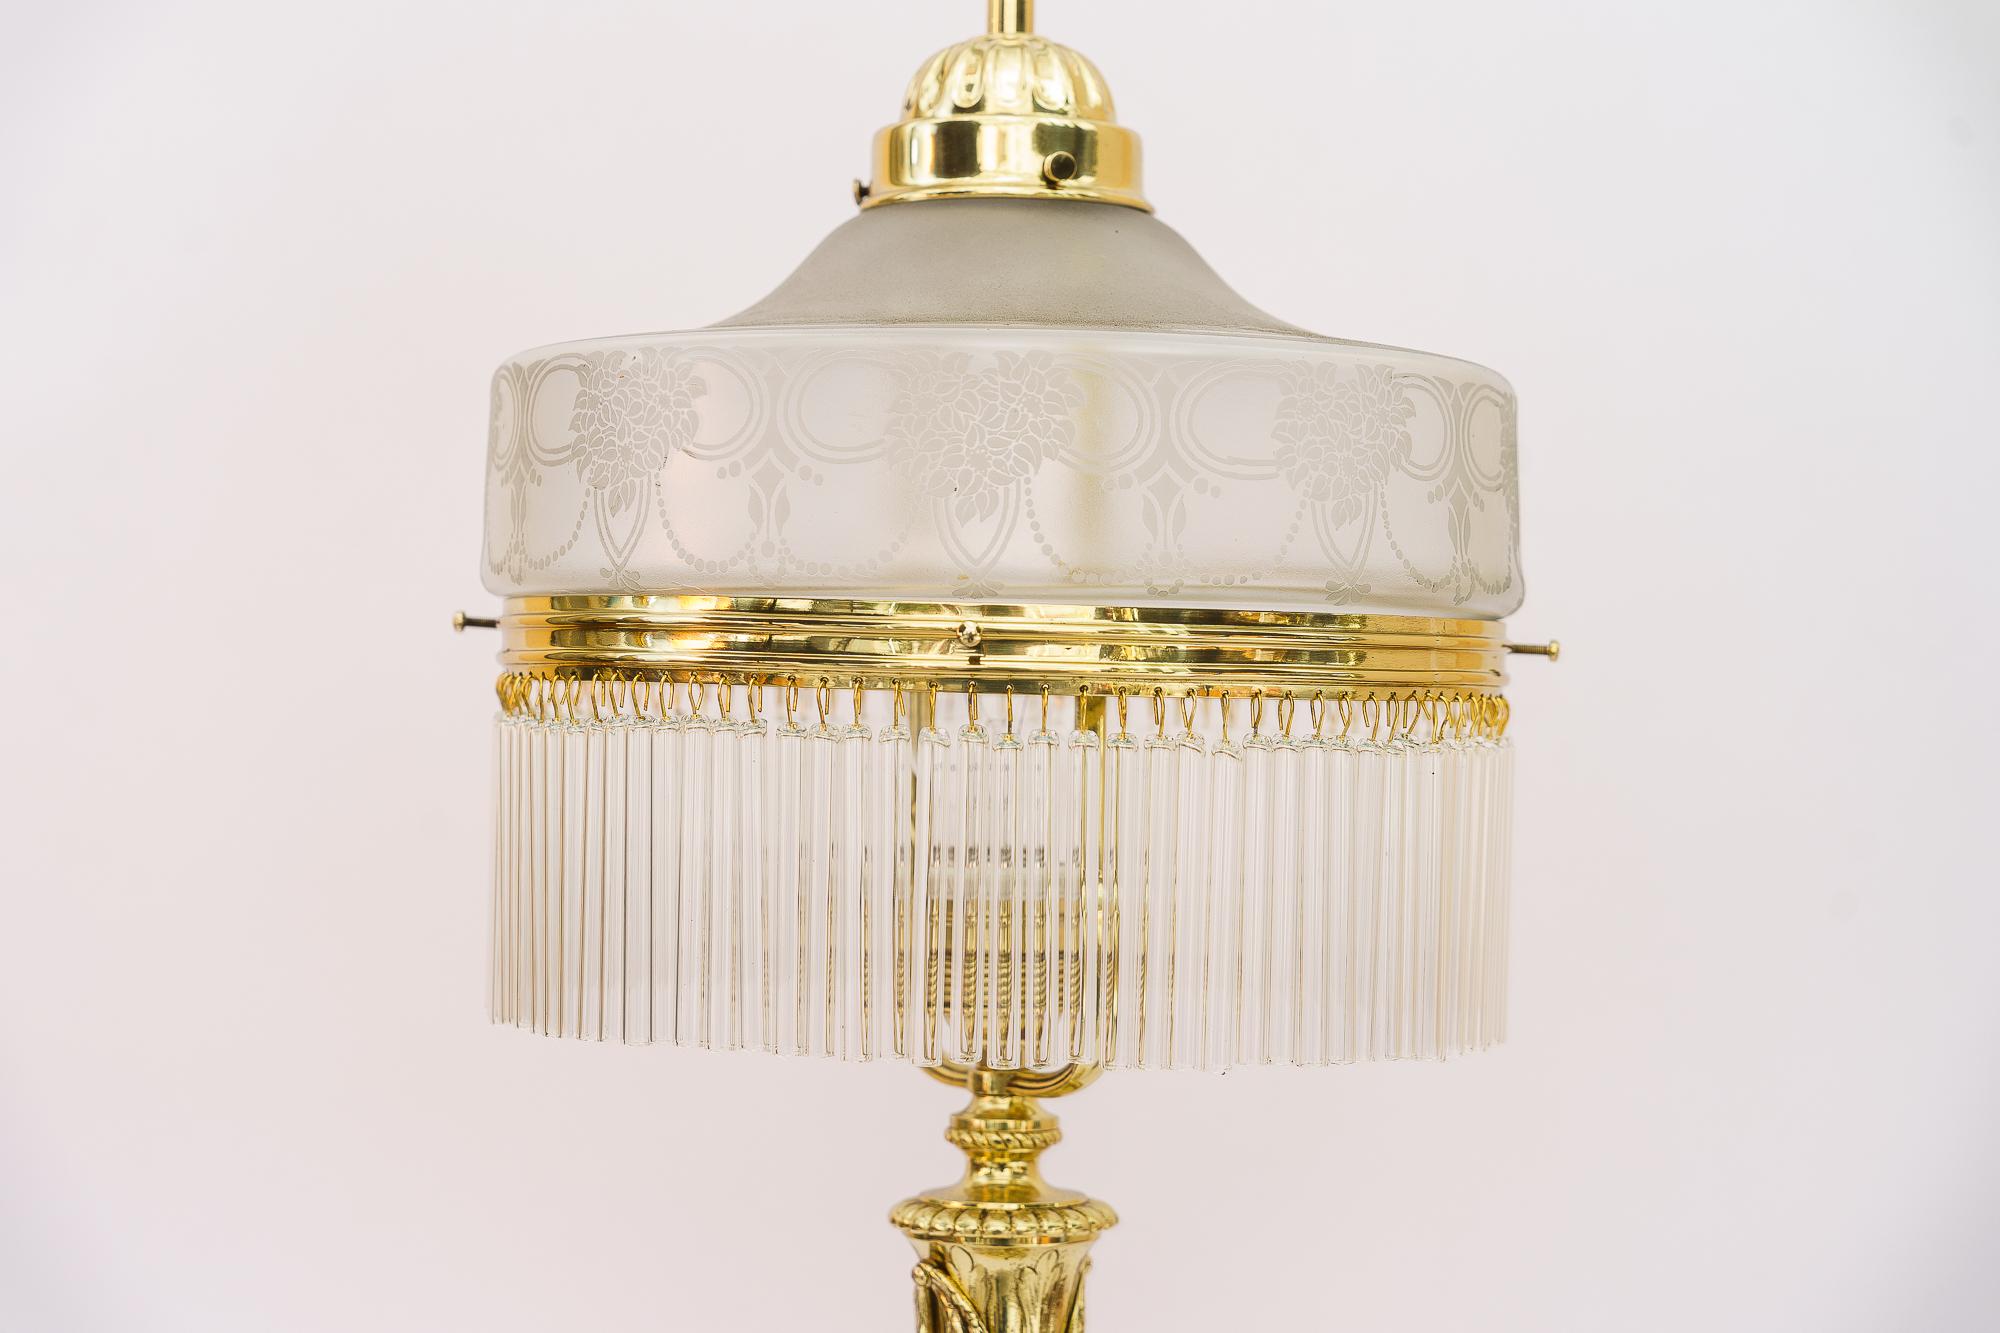 Floral jugendstil table lamp with glass shade vienna around 1908
Brass parts polished and stove enameled
Original glass shade
The glass sticks are replaced ( new ).